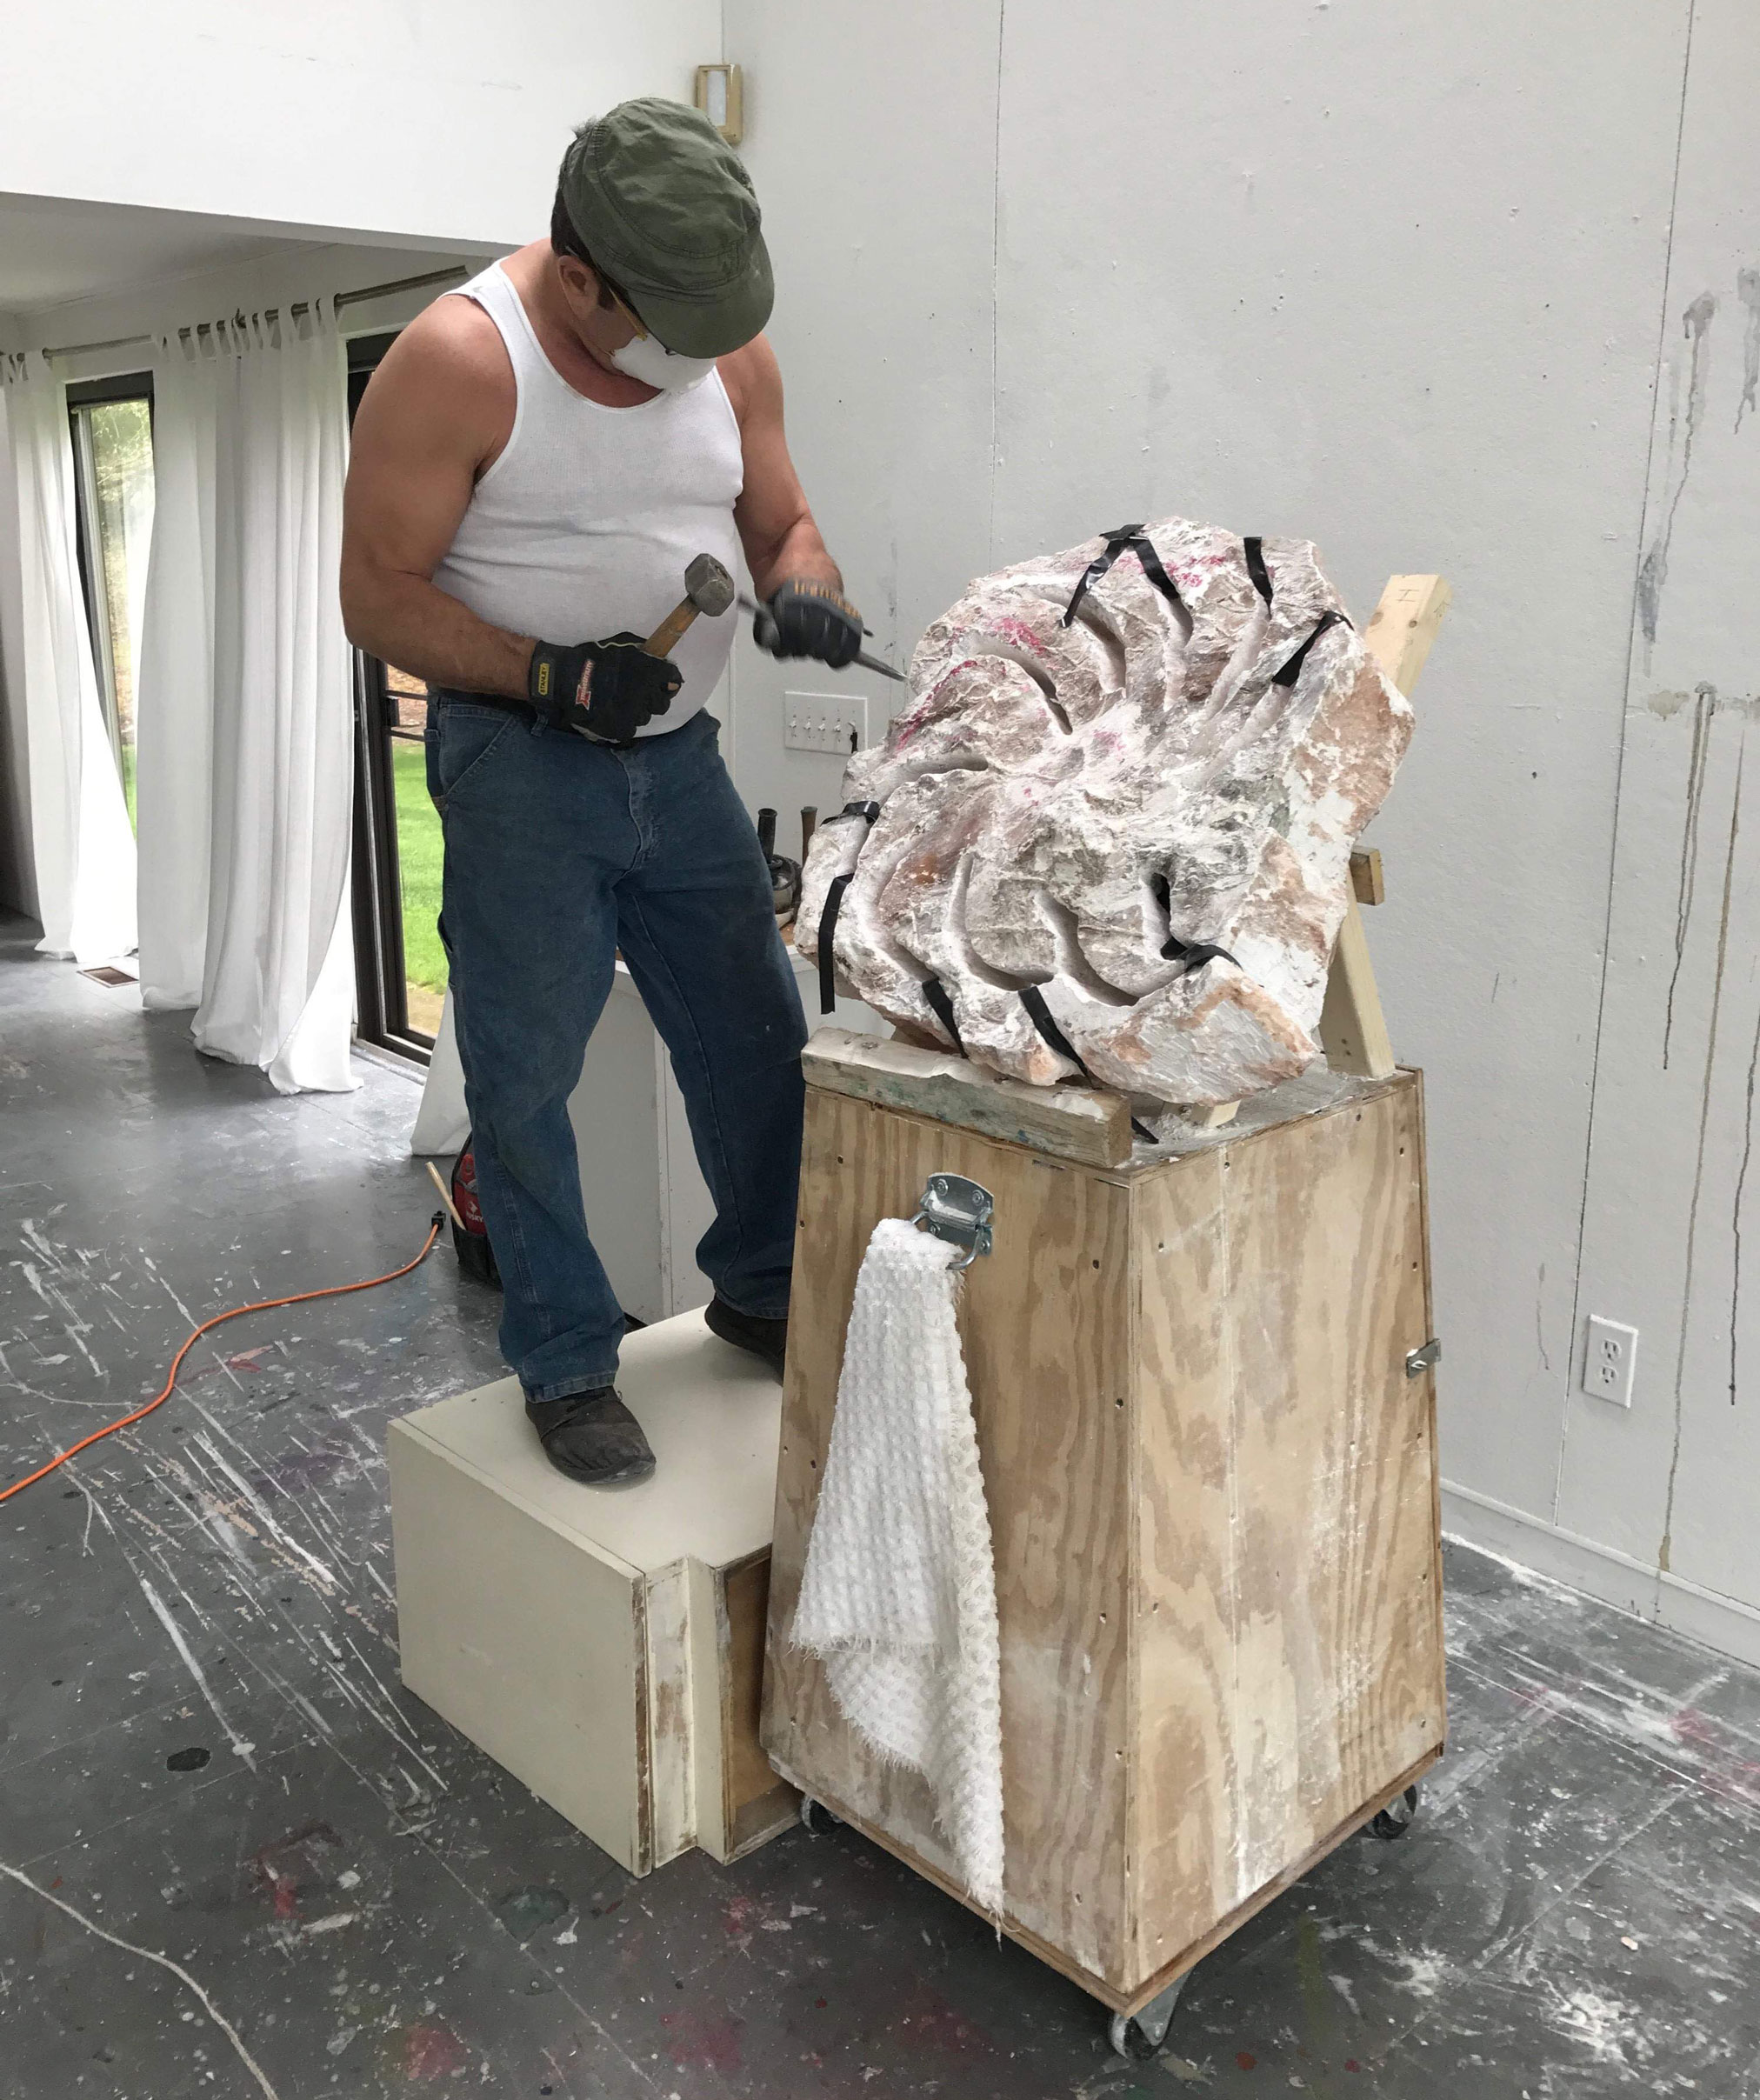 Jerry The Marble Faun at work in his studio - photo by Ted O'Ryan Sheppard